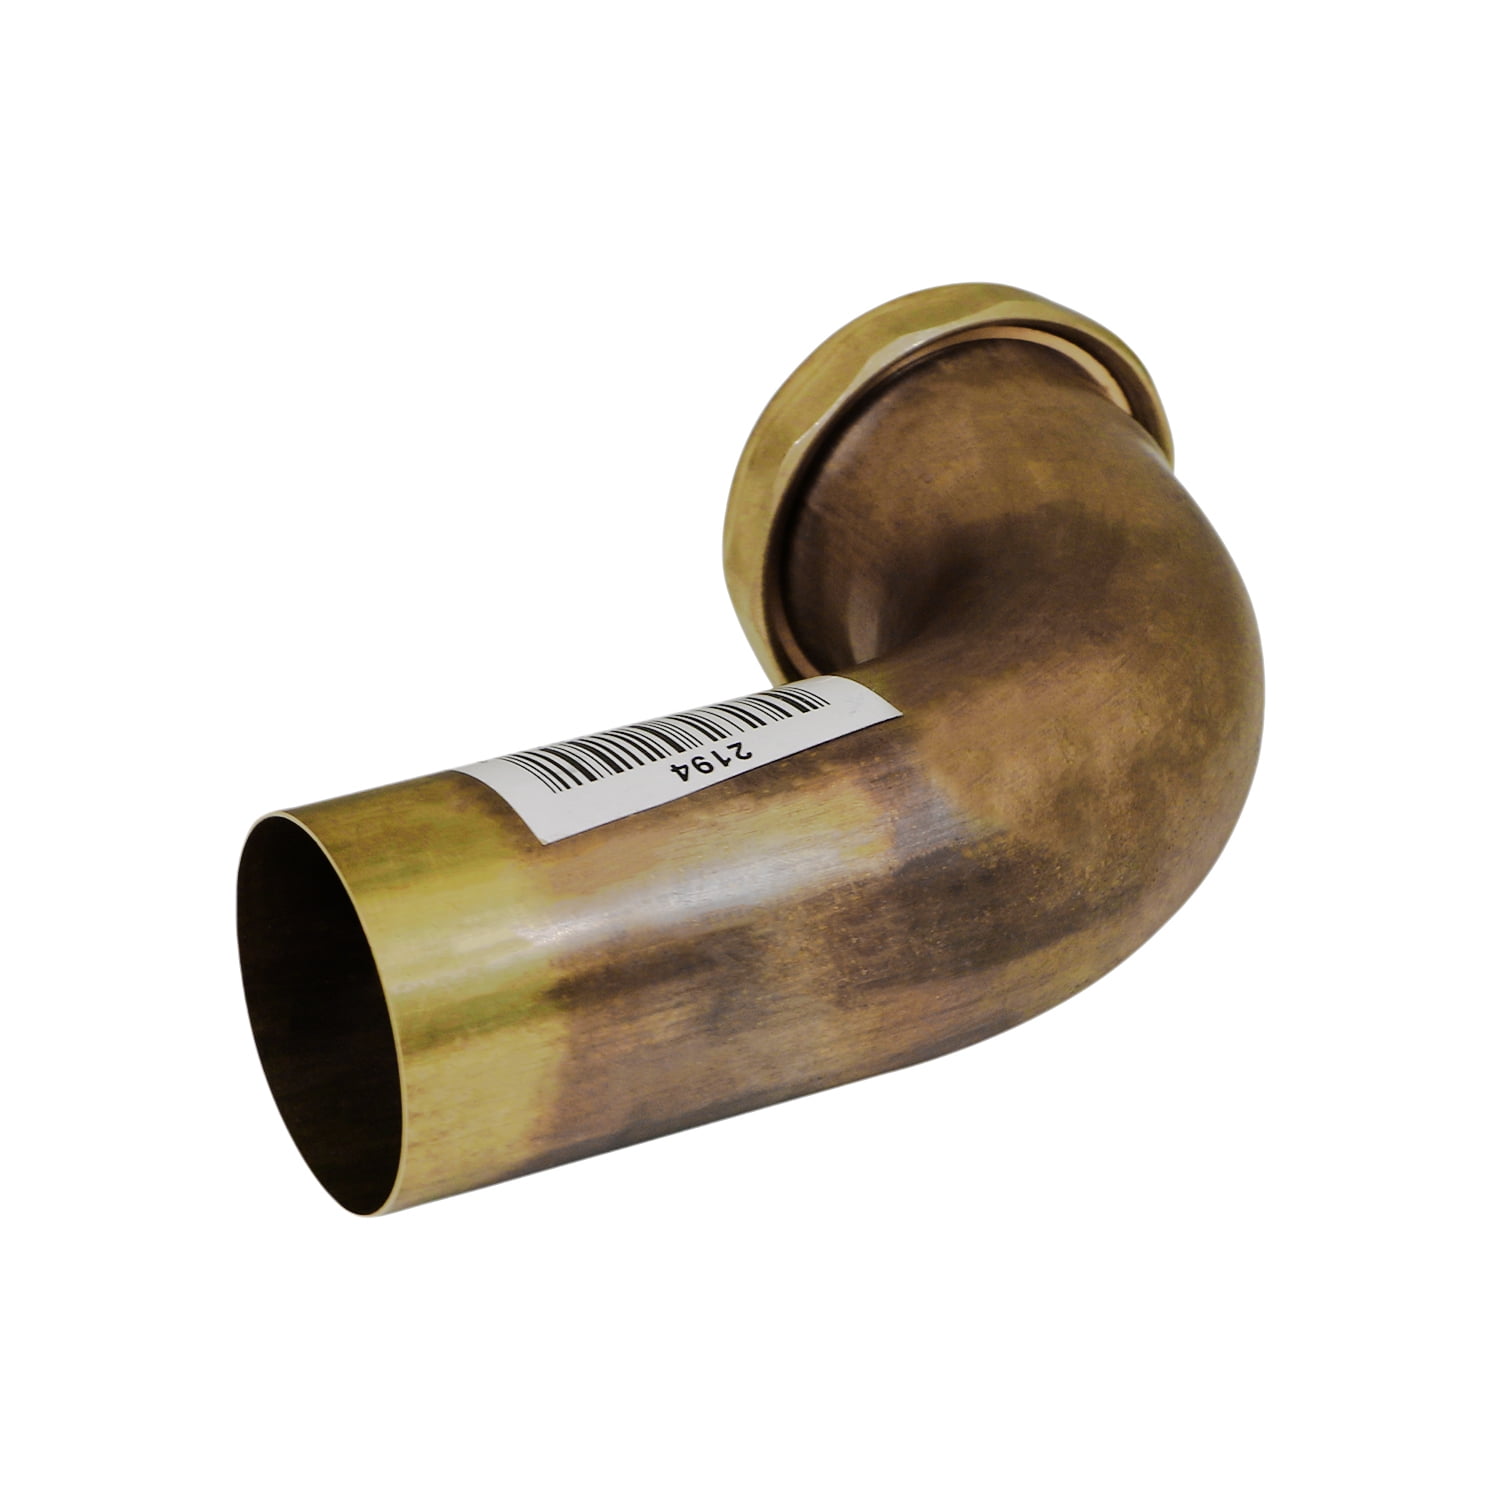 Brass Flexcraft Joint Waste Bend for Tubular Drain Applications 